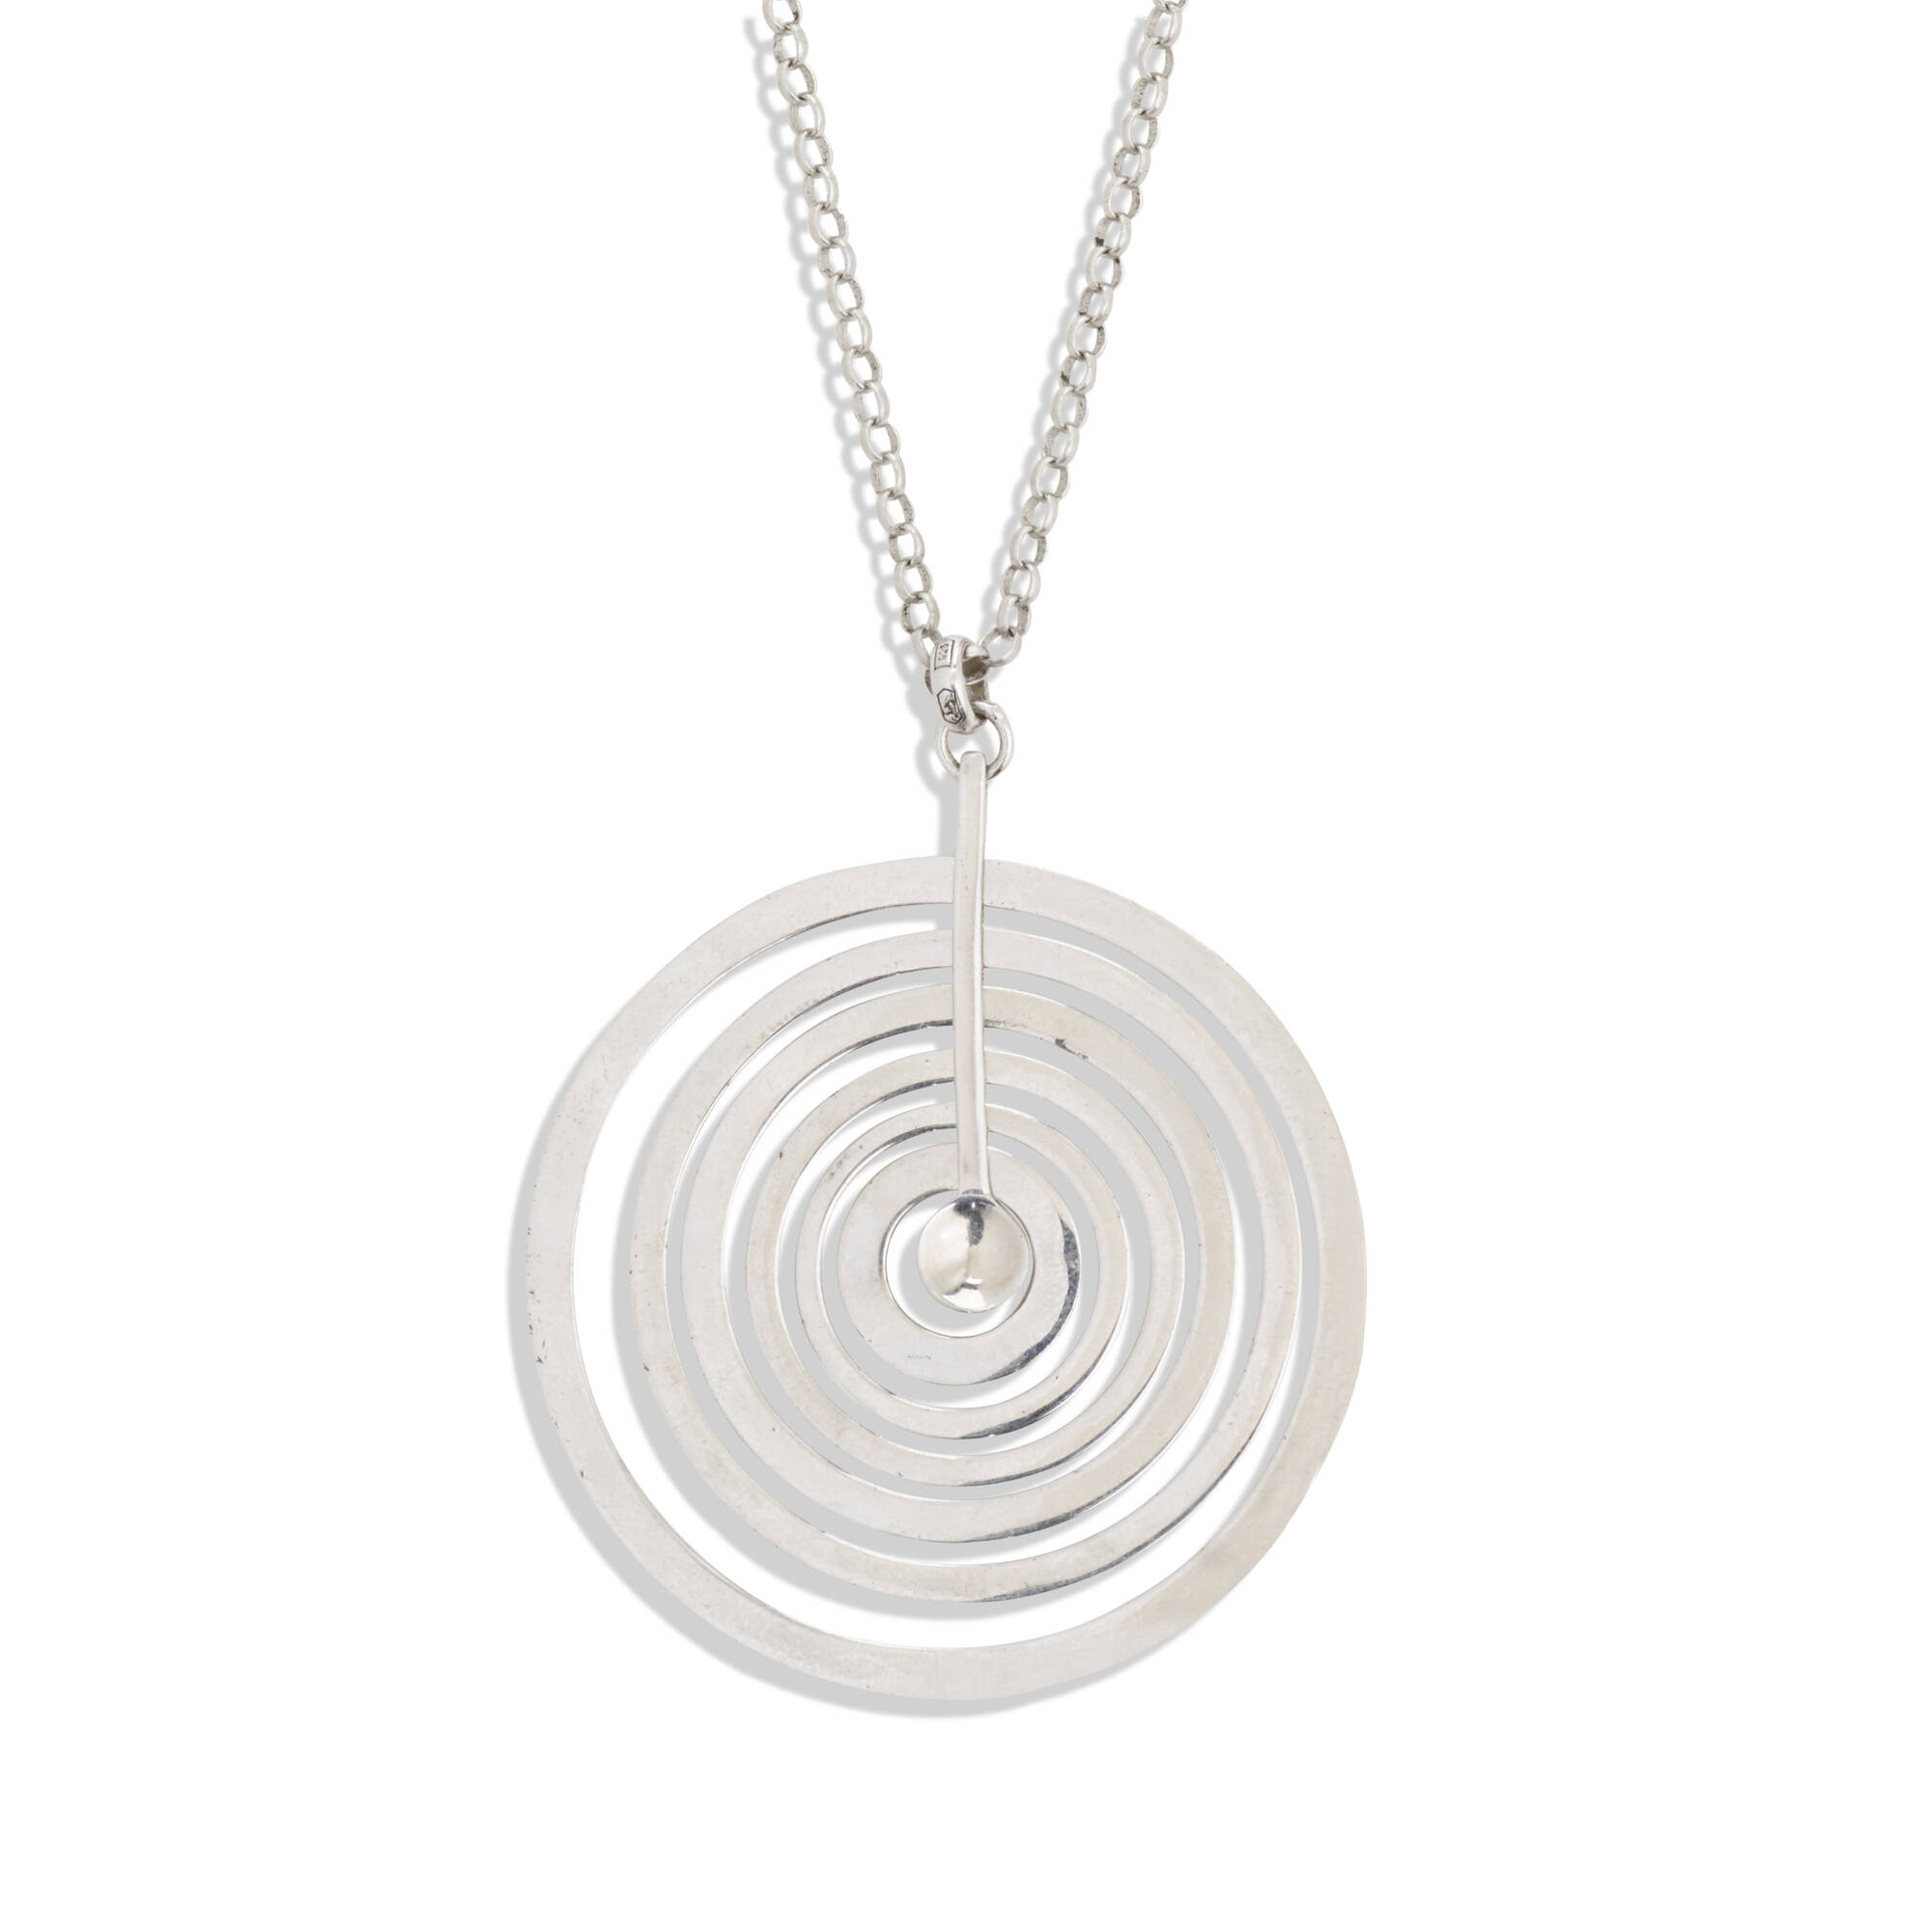 201: TAPIO WIRKKALA, Hopeakuu (Silver Moon) pendant necklace < A Century of  Luxury & Design, 22 July 2020 < Auctions | Wright: Auctions of Art and  Design